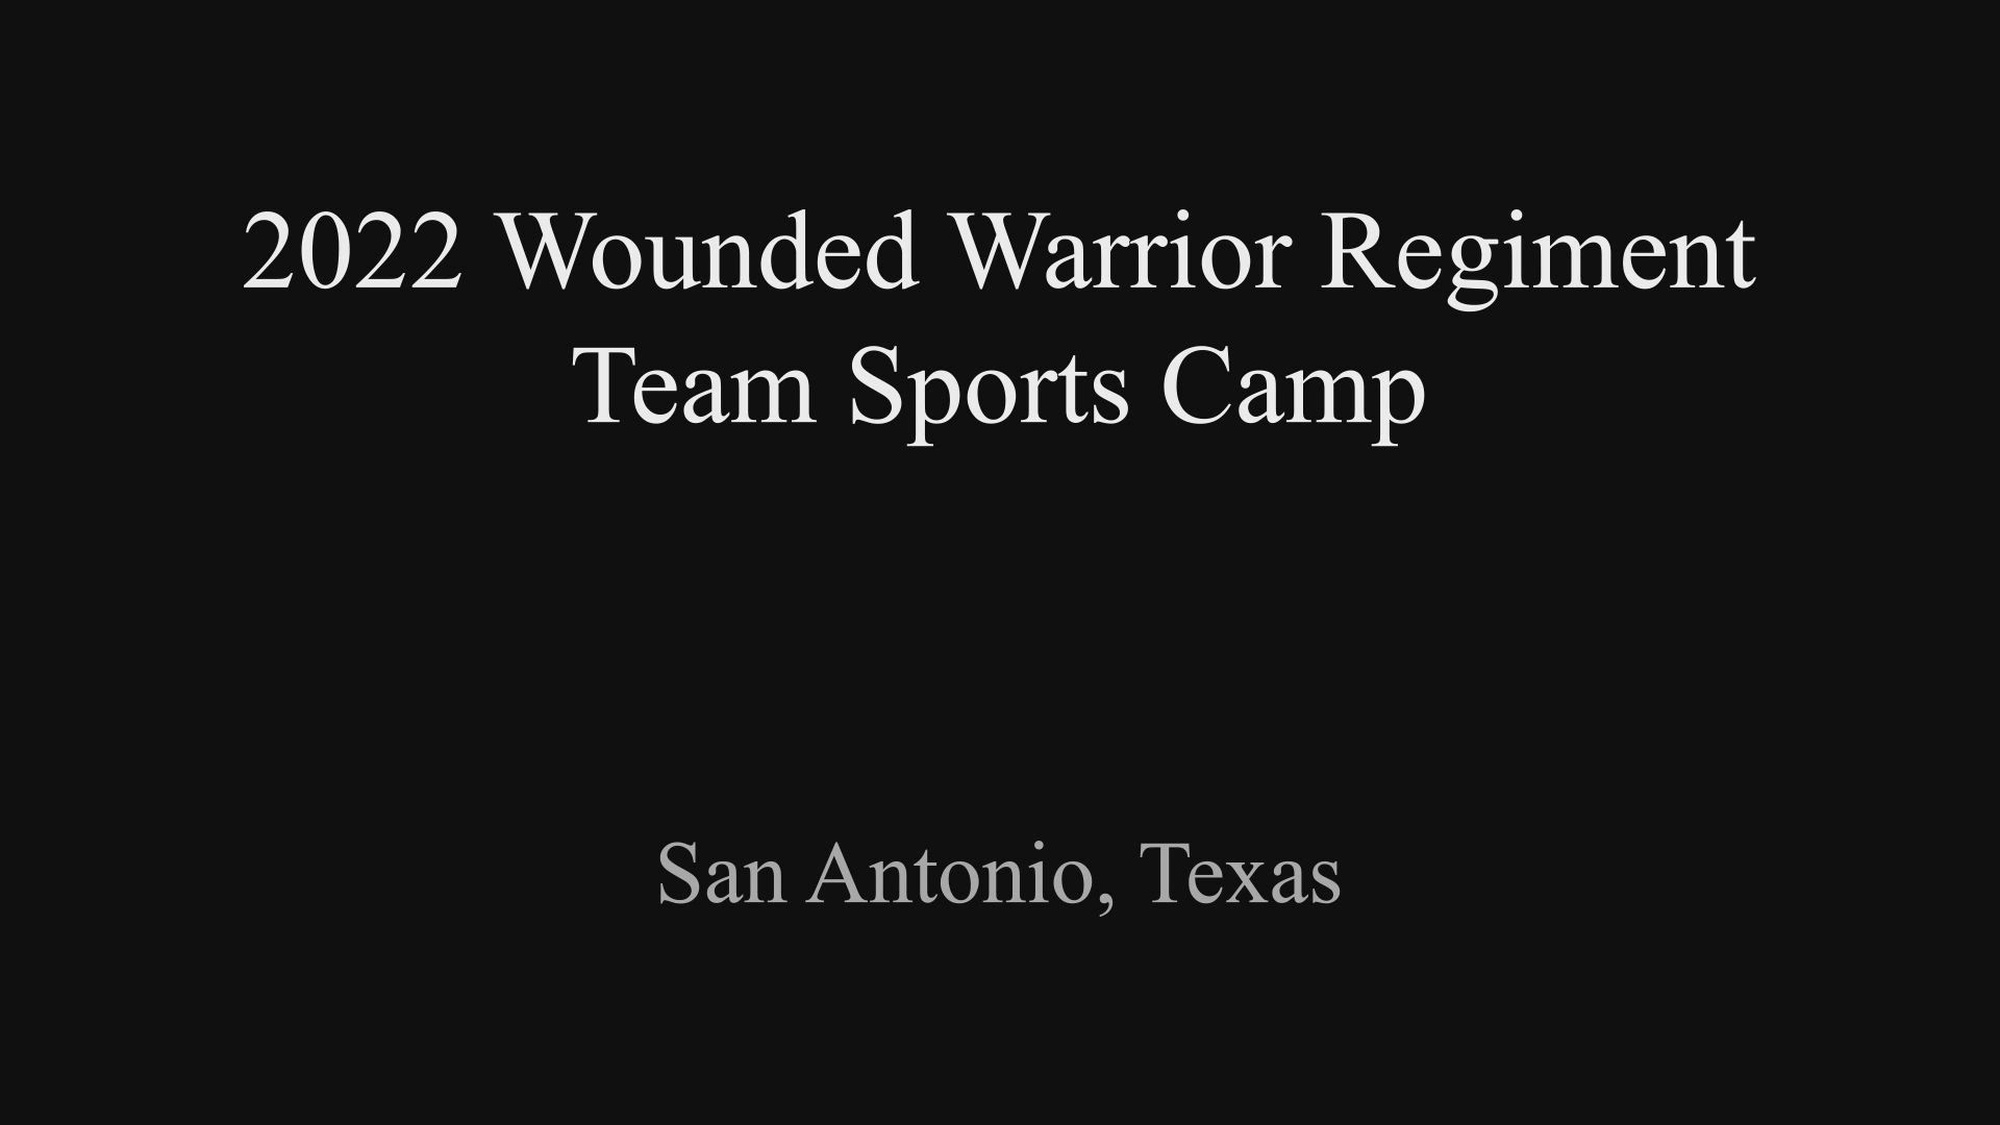 Recovering service members with Wounded Warrior Regiment participate in a training camp in San Antonio, Texas, June 6-10, 2022. Marines attended the camp to hone their skills in wheelchair basketball, wheelchair rugby, and sitting volleyball to prepare for the 2022 DoD Warrior Games. The DoD Warrior Games is a multi-sport event for wounded, ill, and injured service members. (U.S. Marine Corps video by Cpl. Kedrick Schumacher)